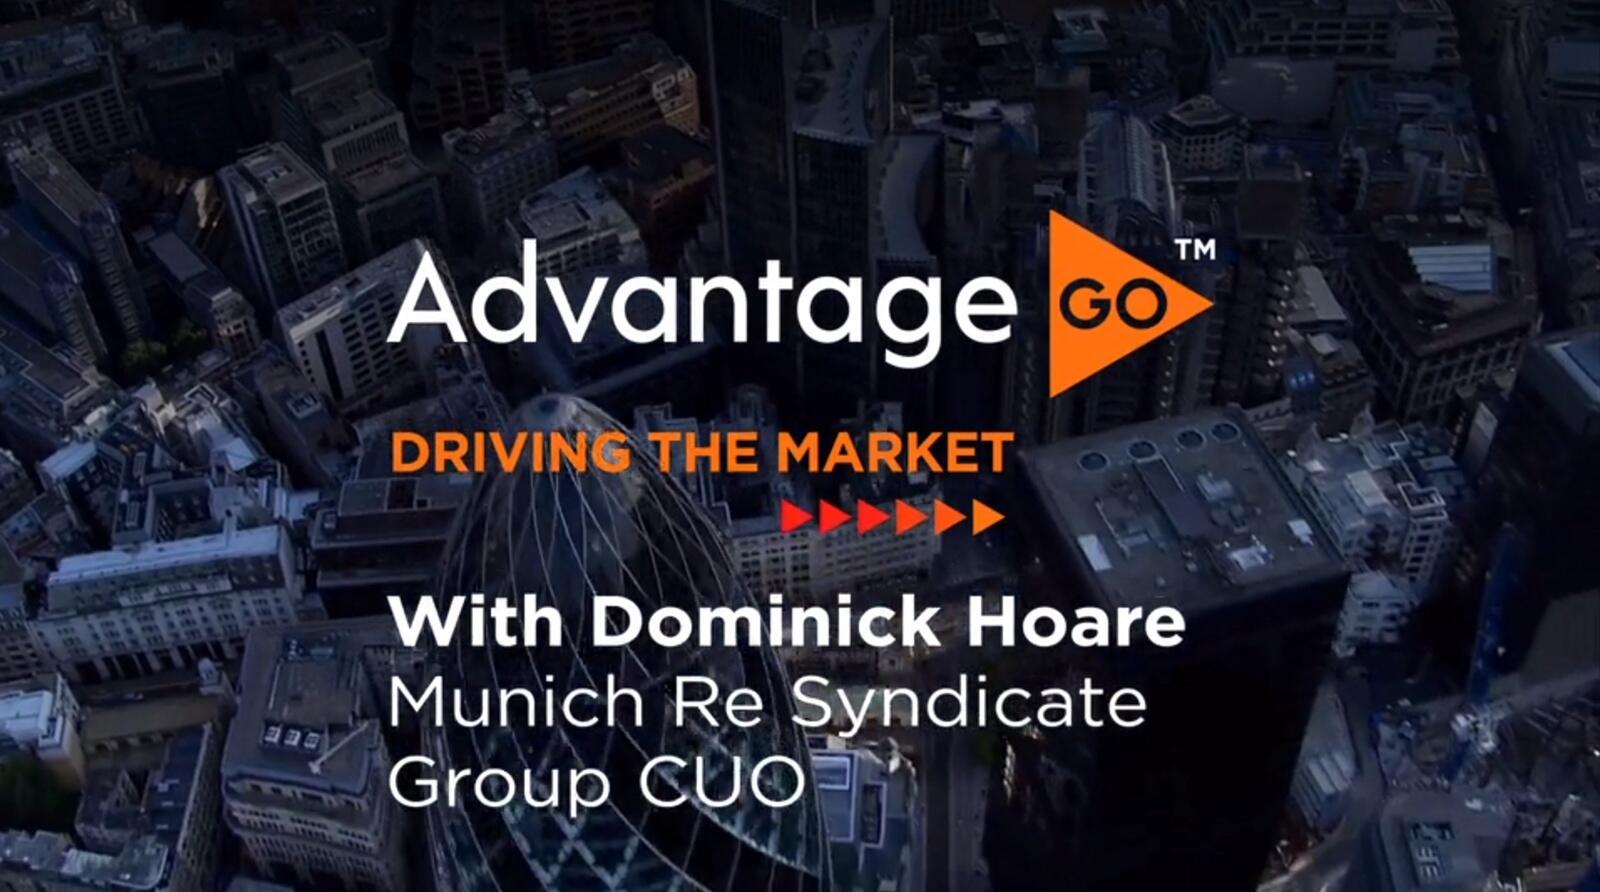 Driving the market - Dominick Hoare